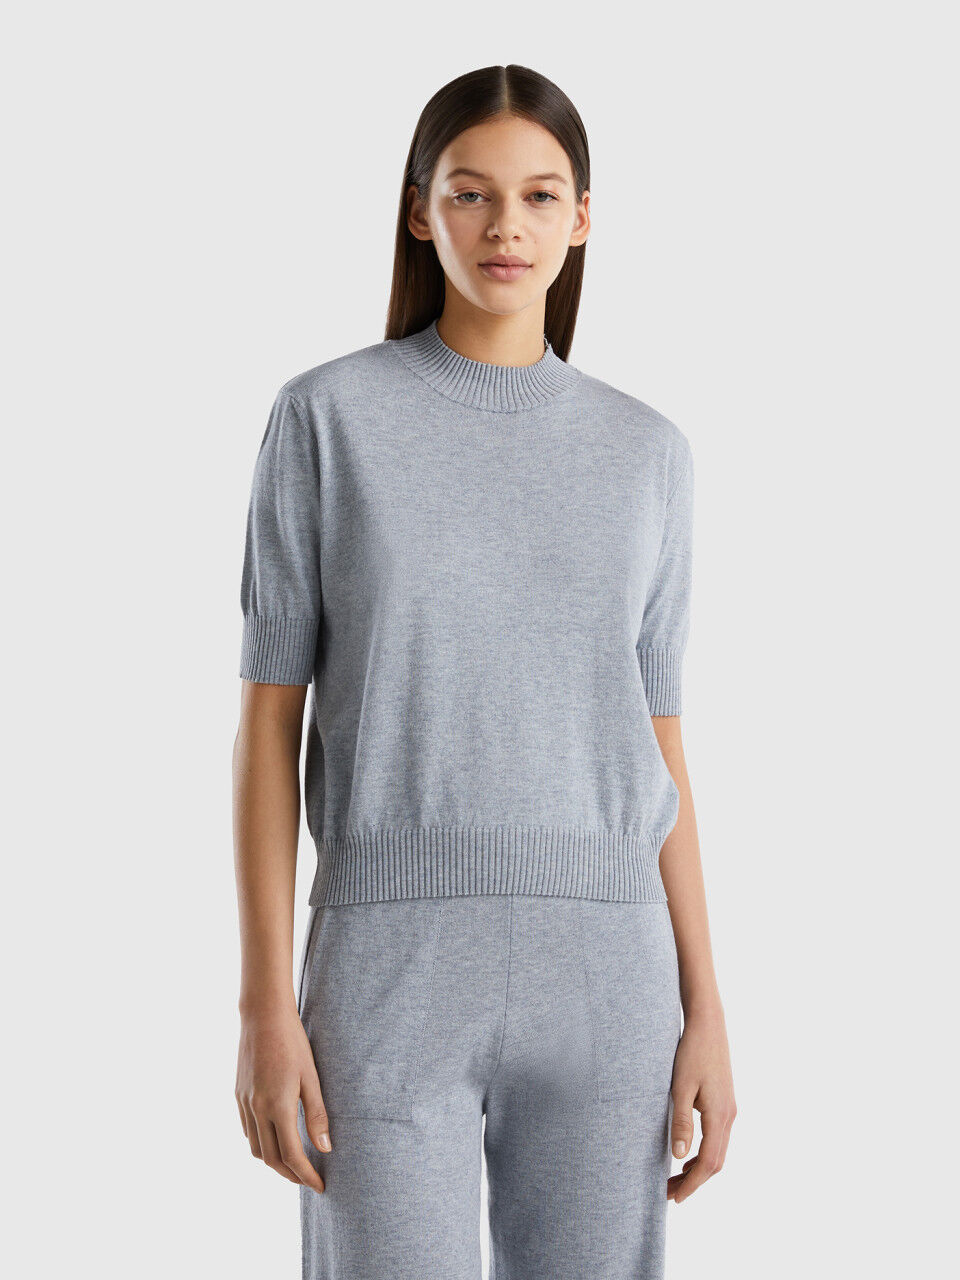 Short sleeve top in cashmere blend